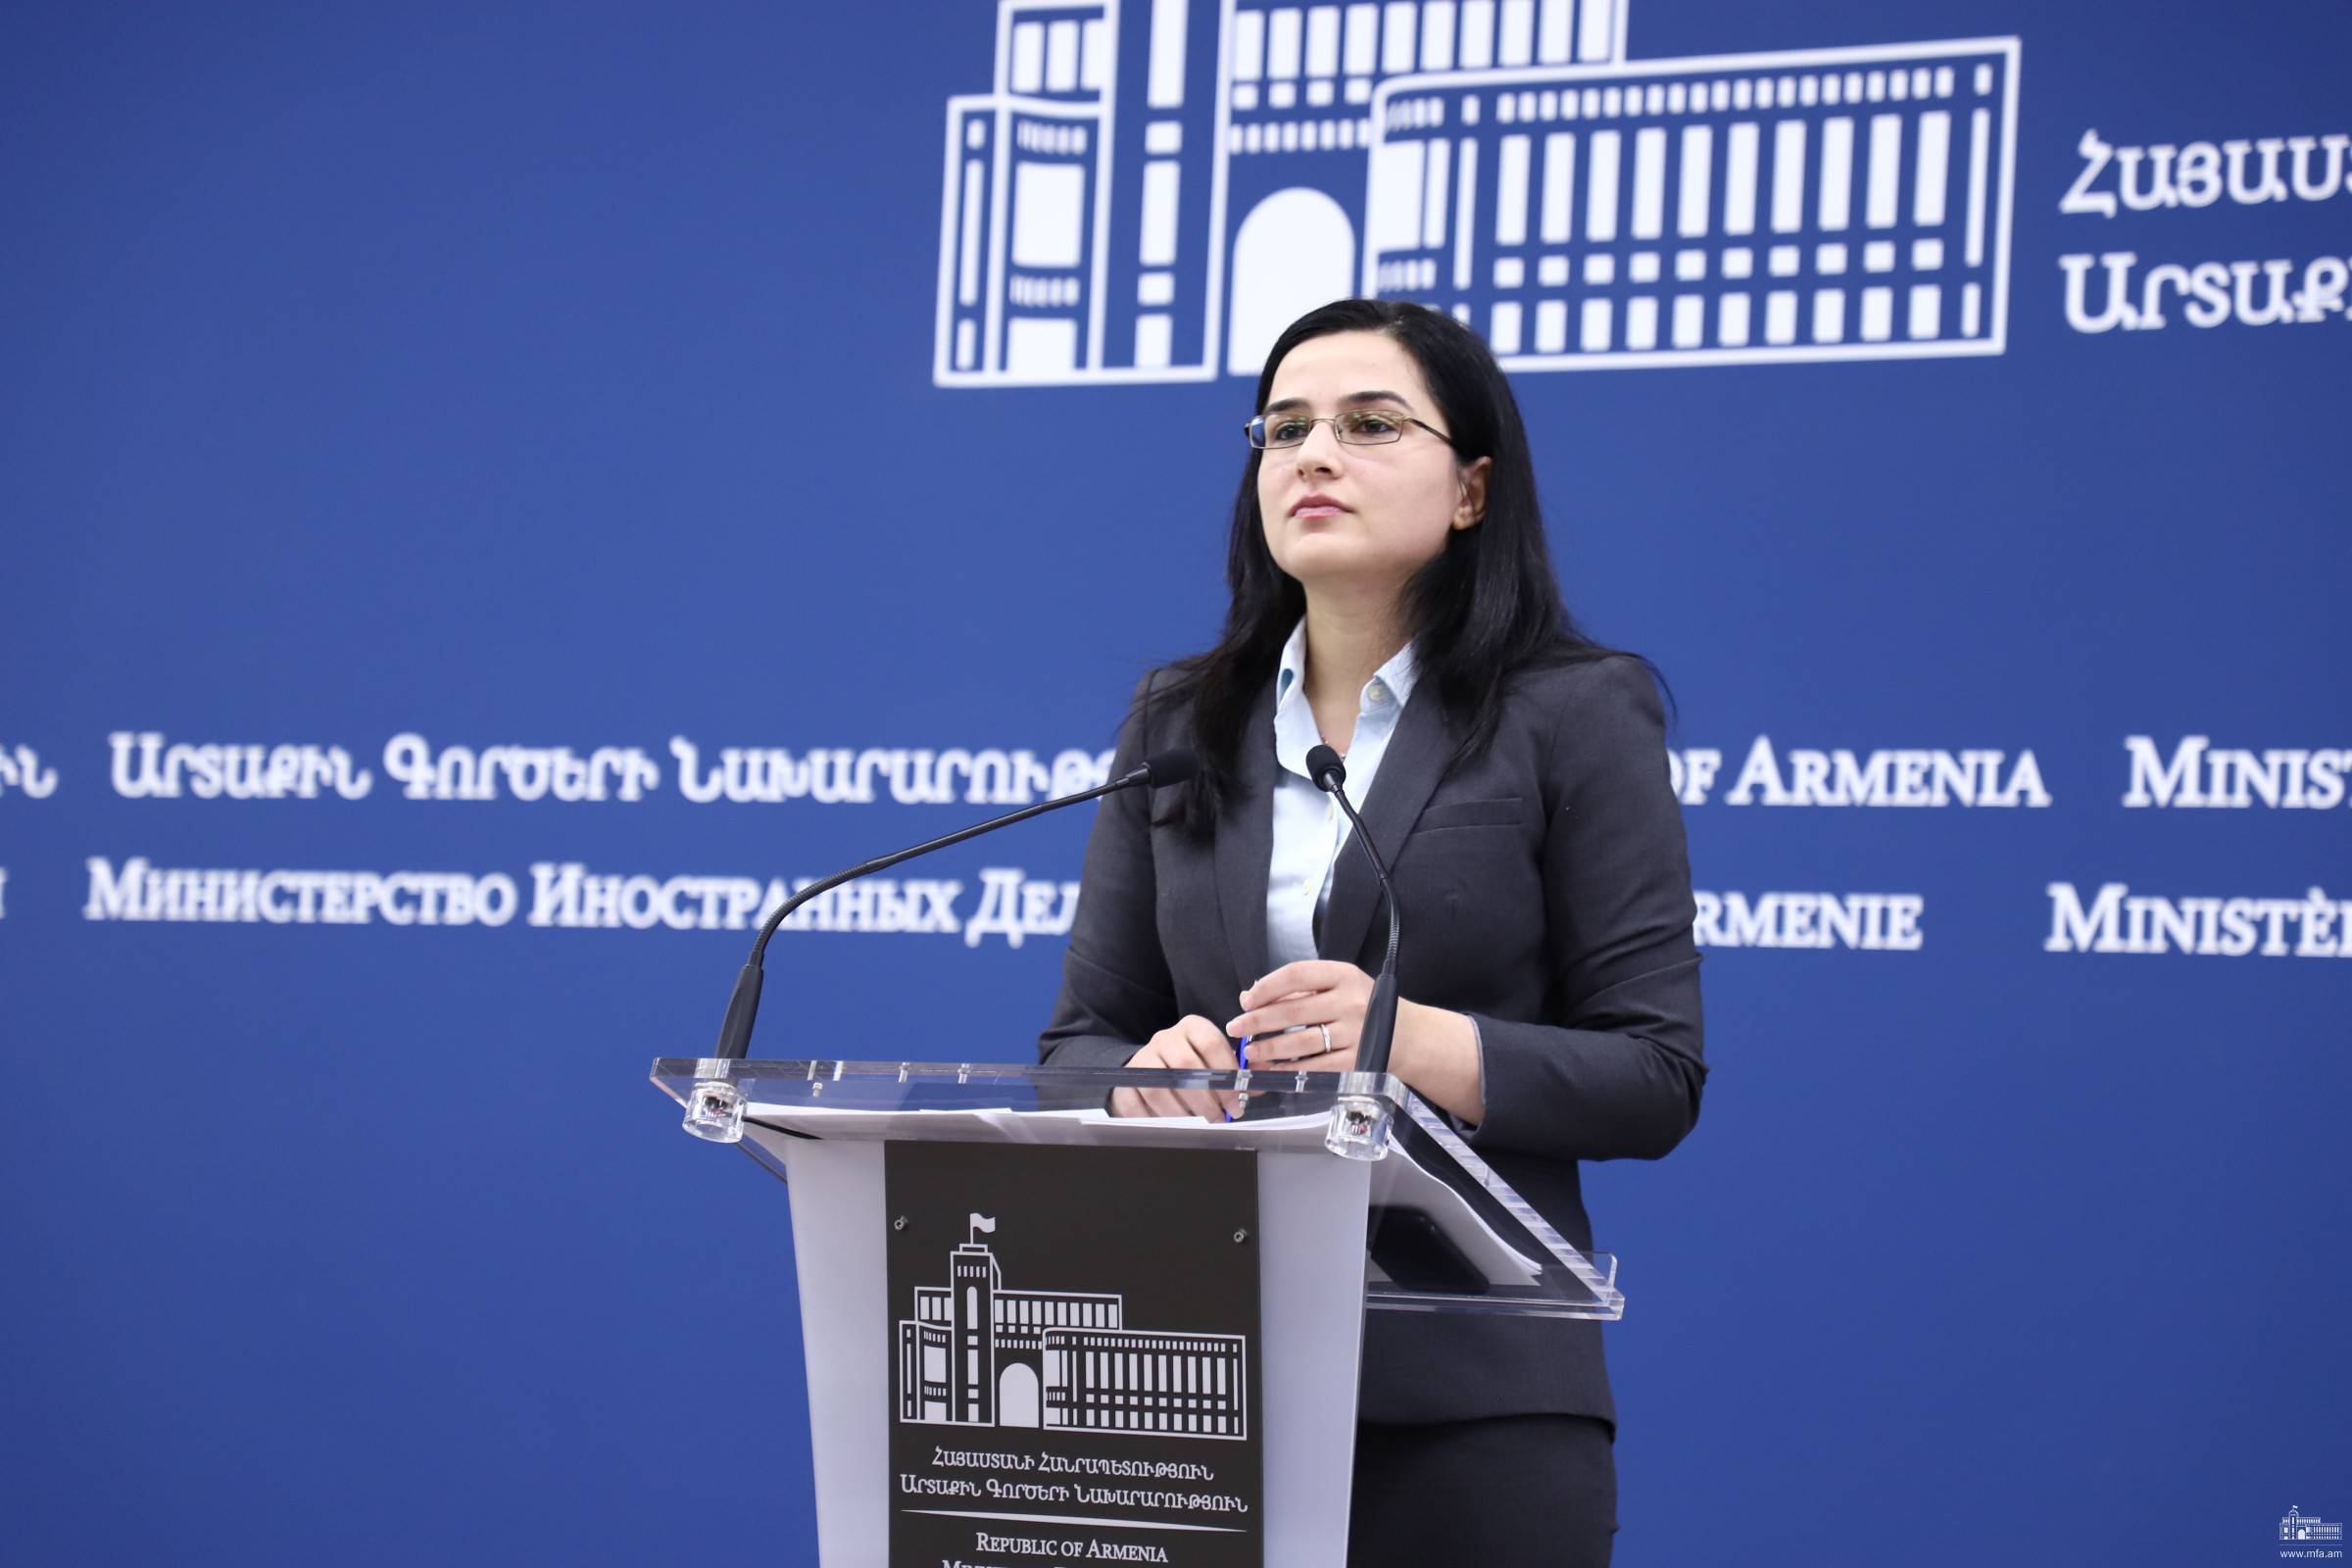 Response by the Spokesperson of the Foreign Ministry of Armenia to the question regarding the parliamentary elections held in Azerbaijan